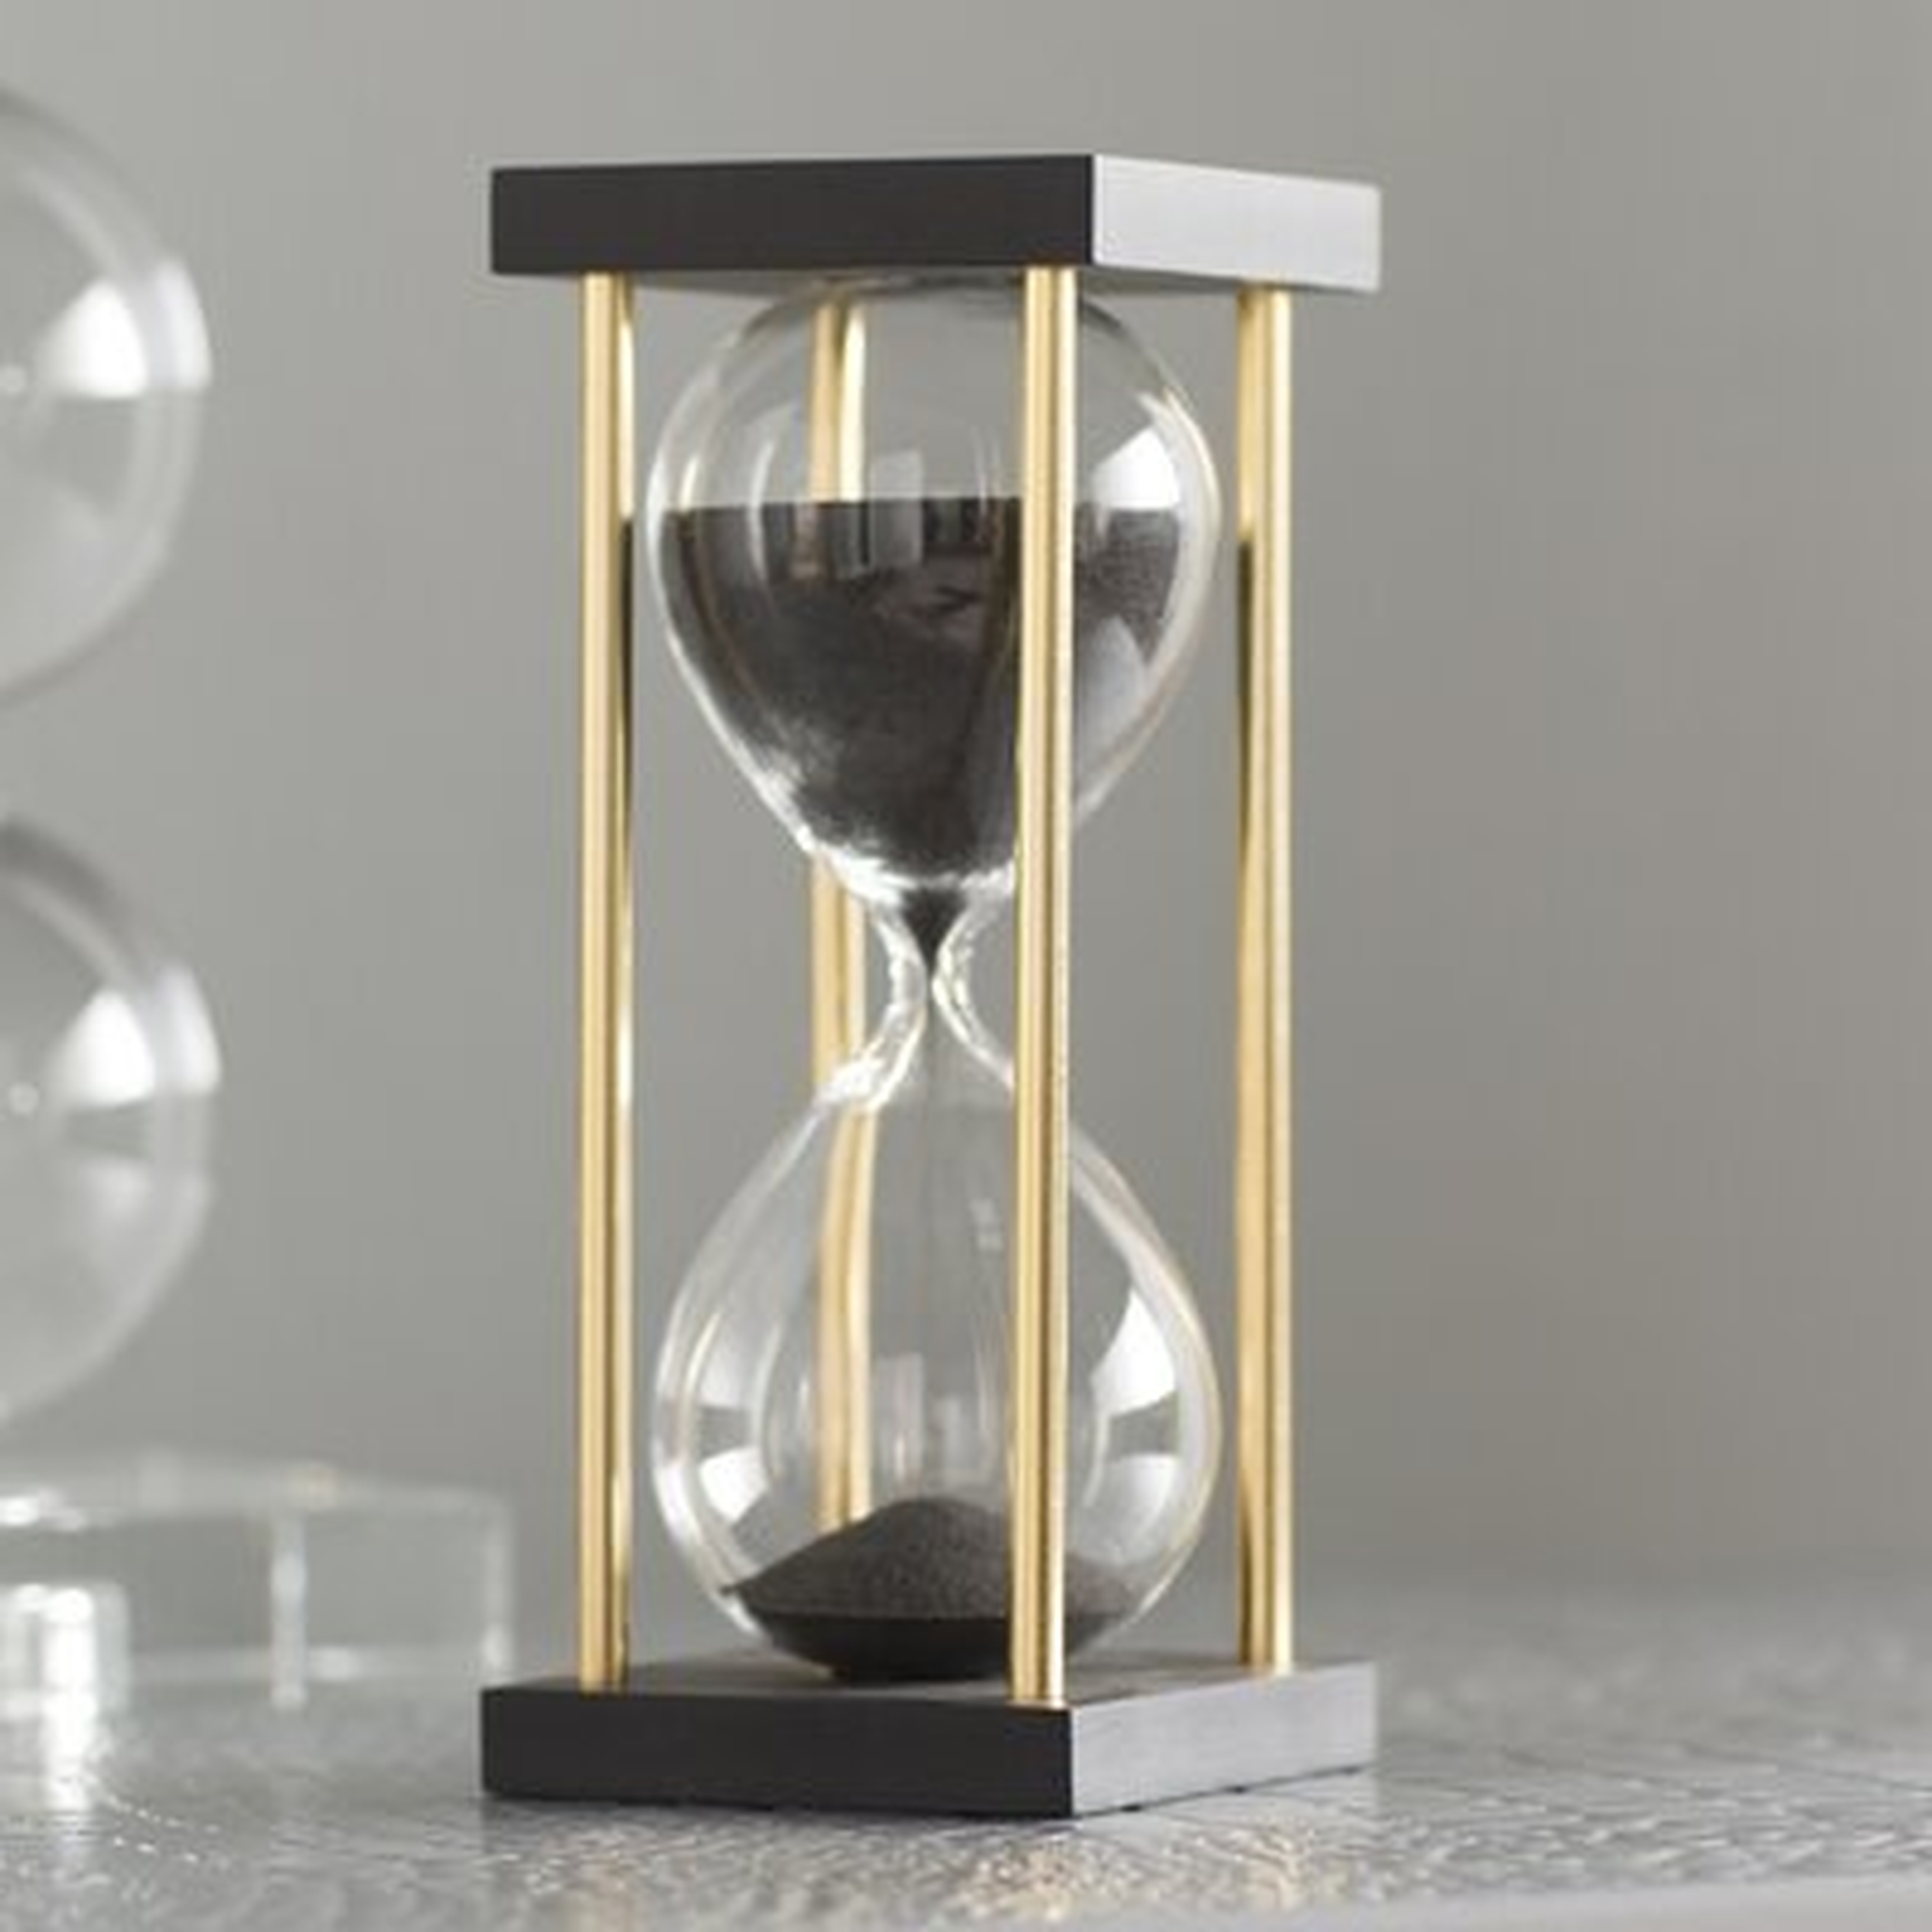 Harold Hand-crafted MDF Hourglass in Stand - Wayfair